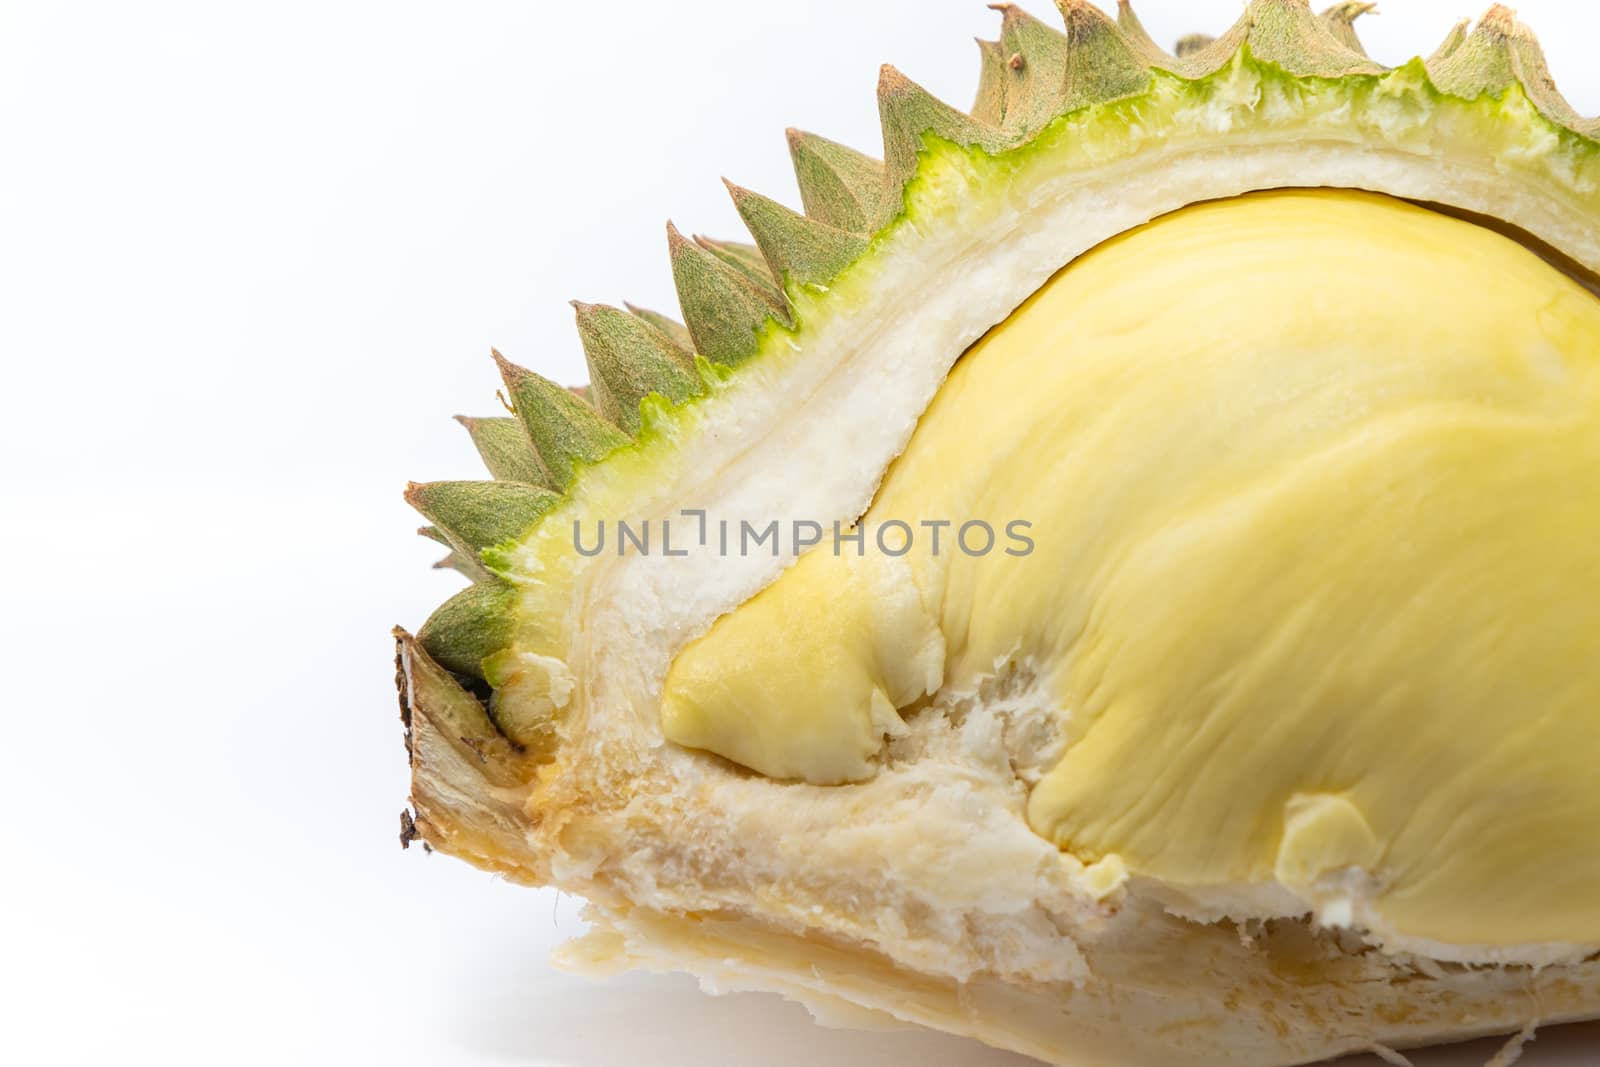 The Close up peeled Durian for eat isolated on white background, the famous fruit from Thailand, it also known as The King of Fruits.